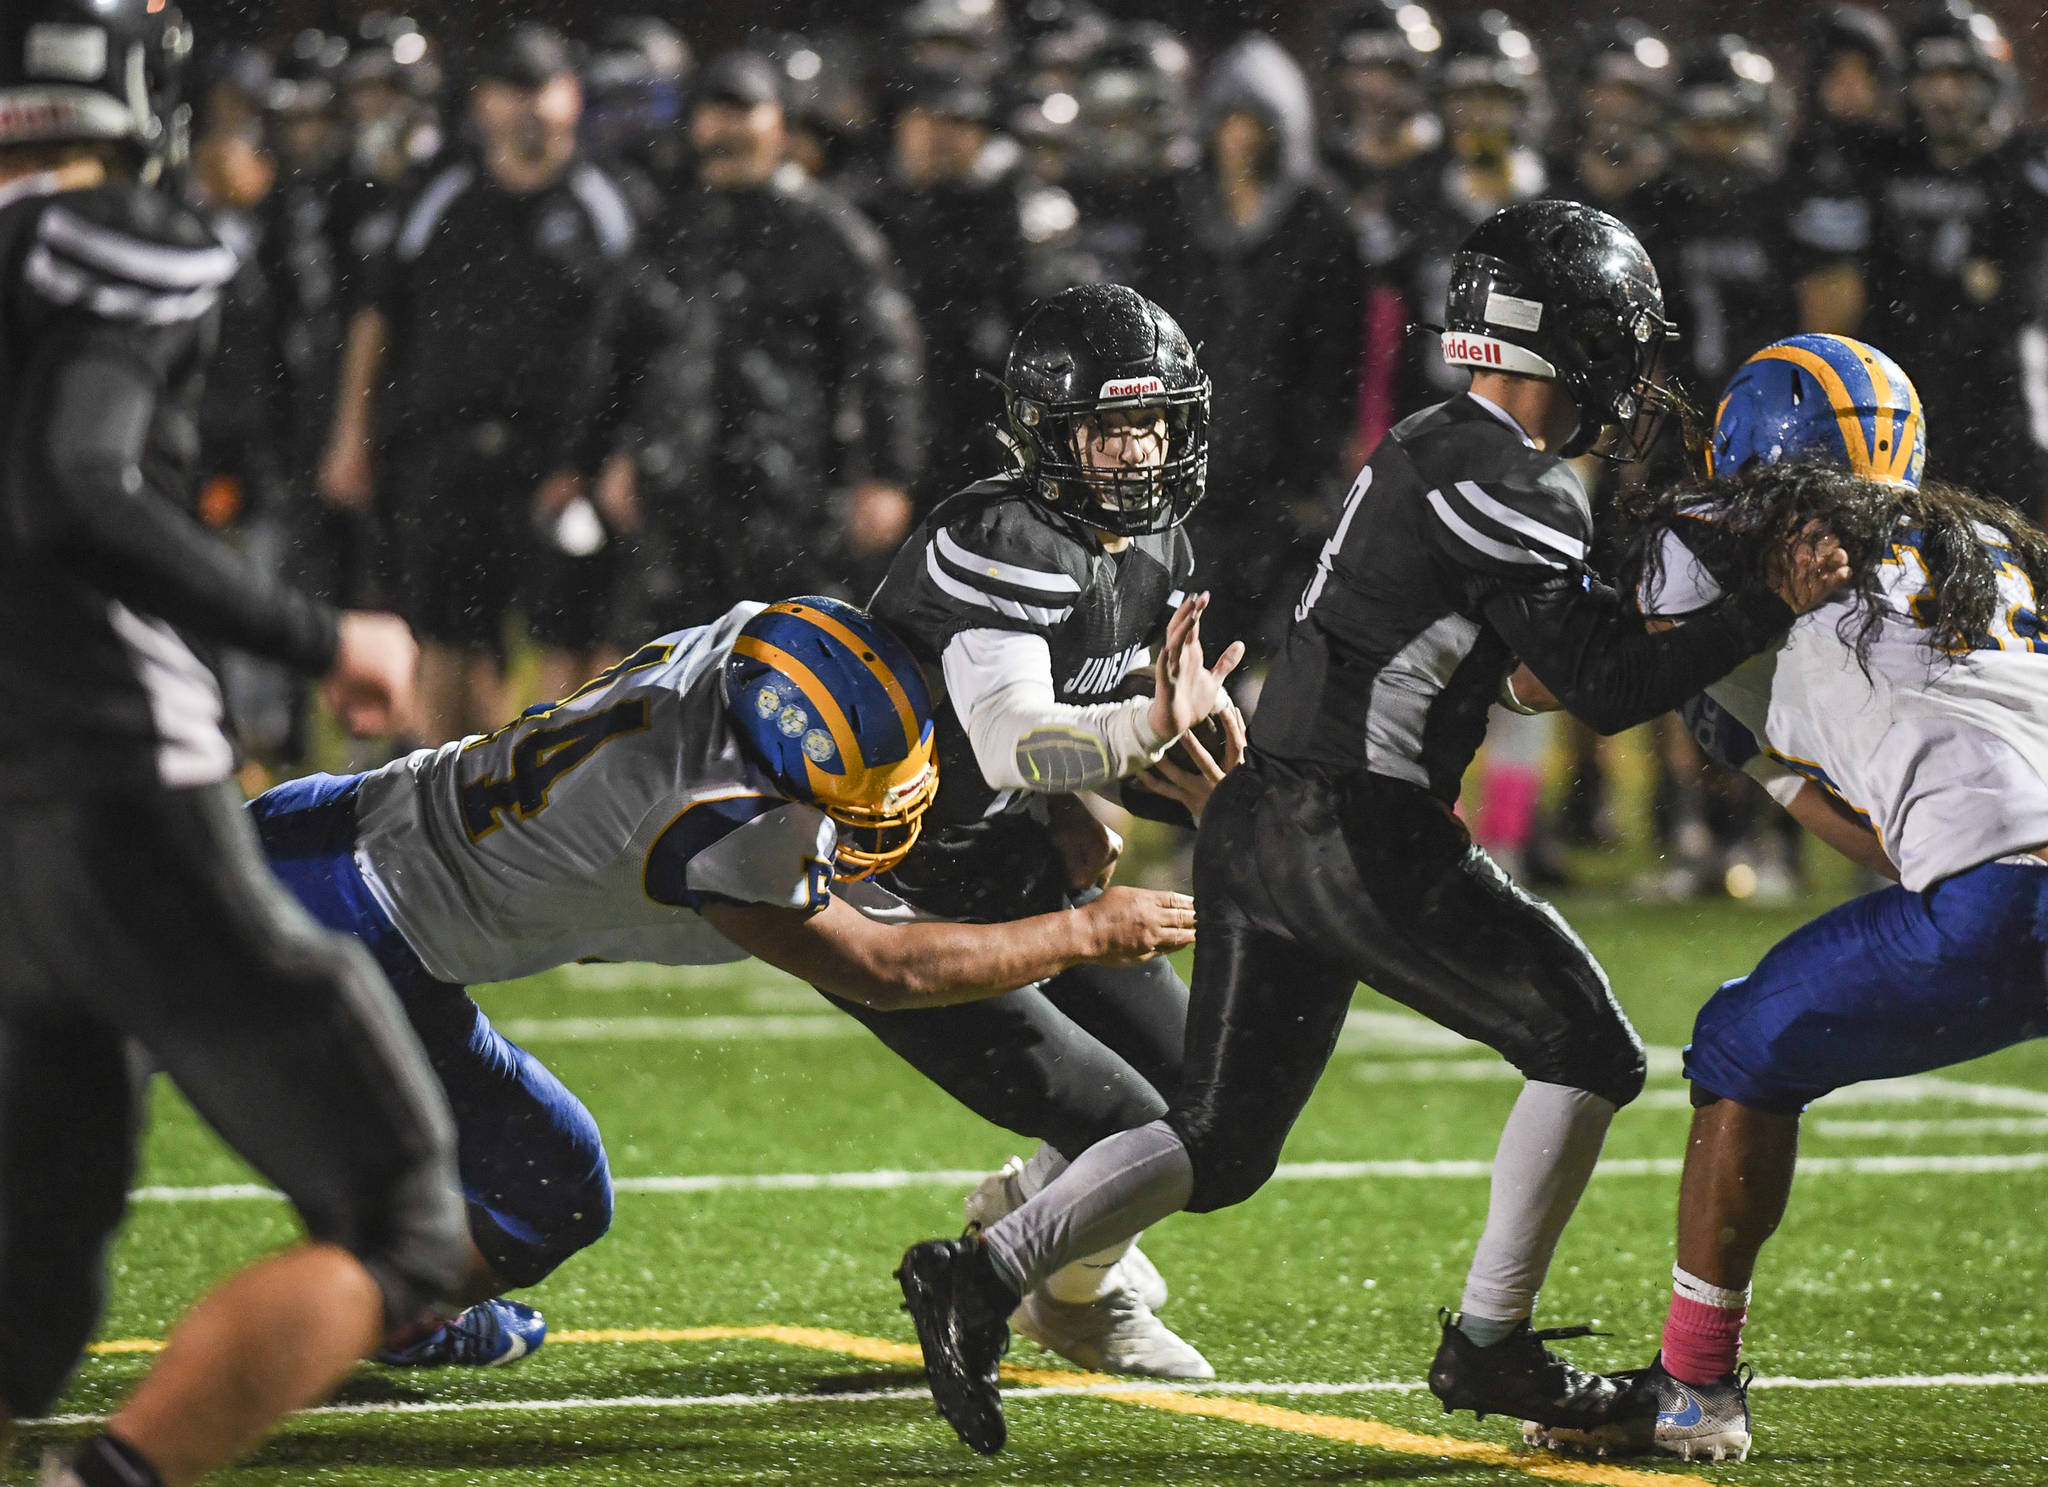 Juneau’s last playoff game against South was epic. Saturday’s rematch could be too.